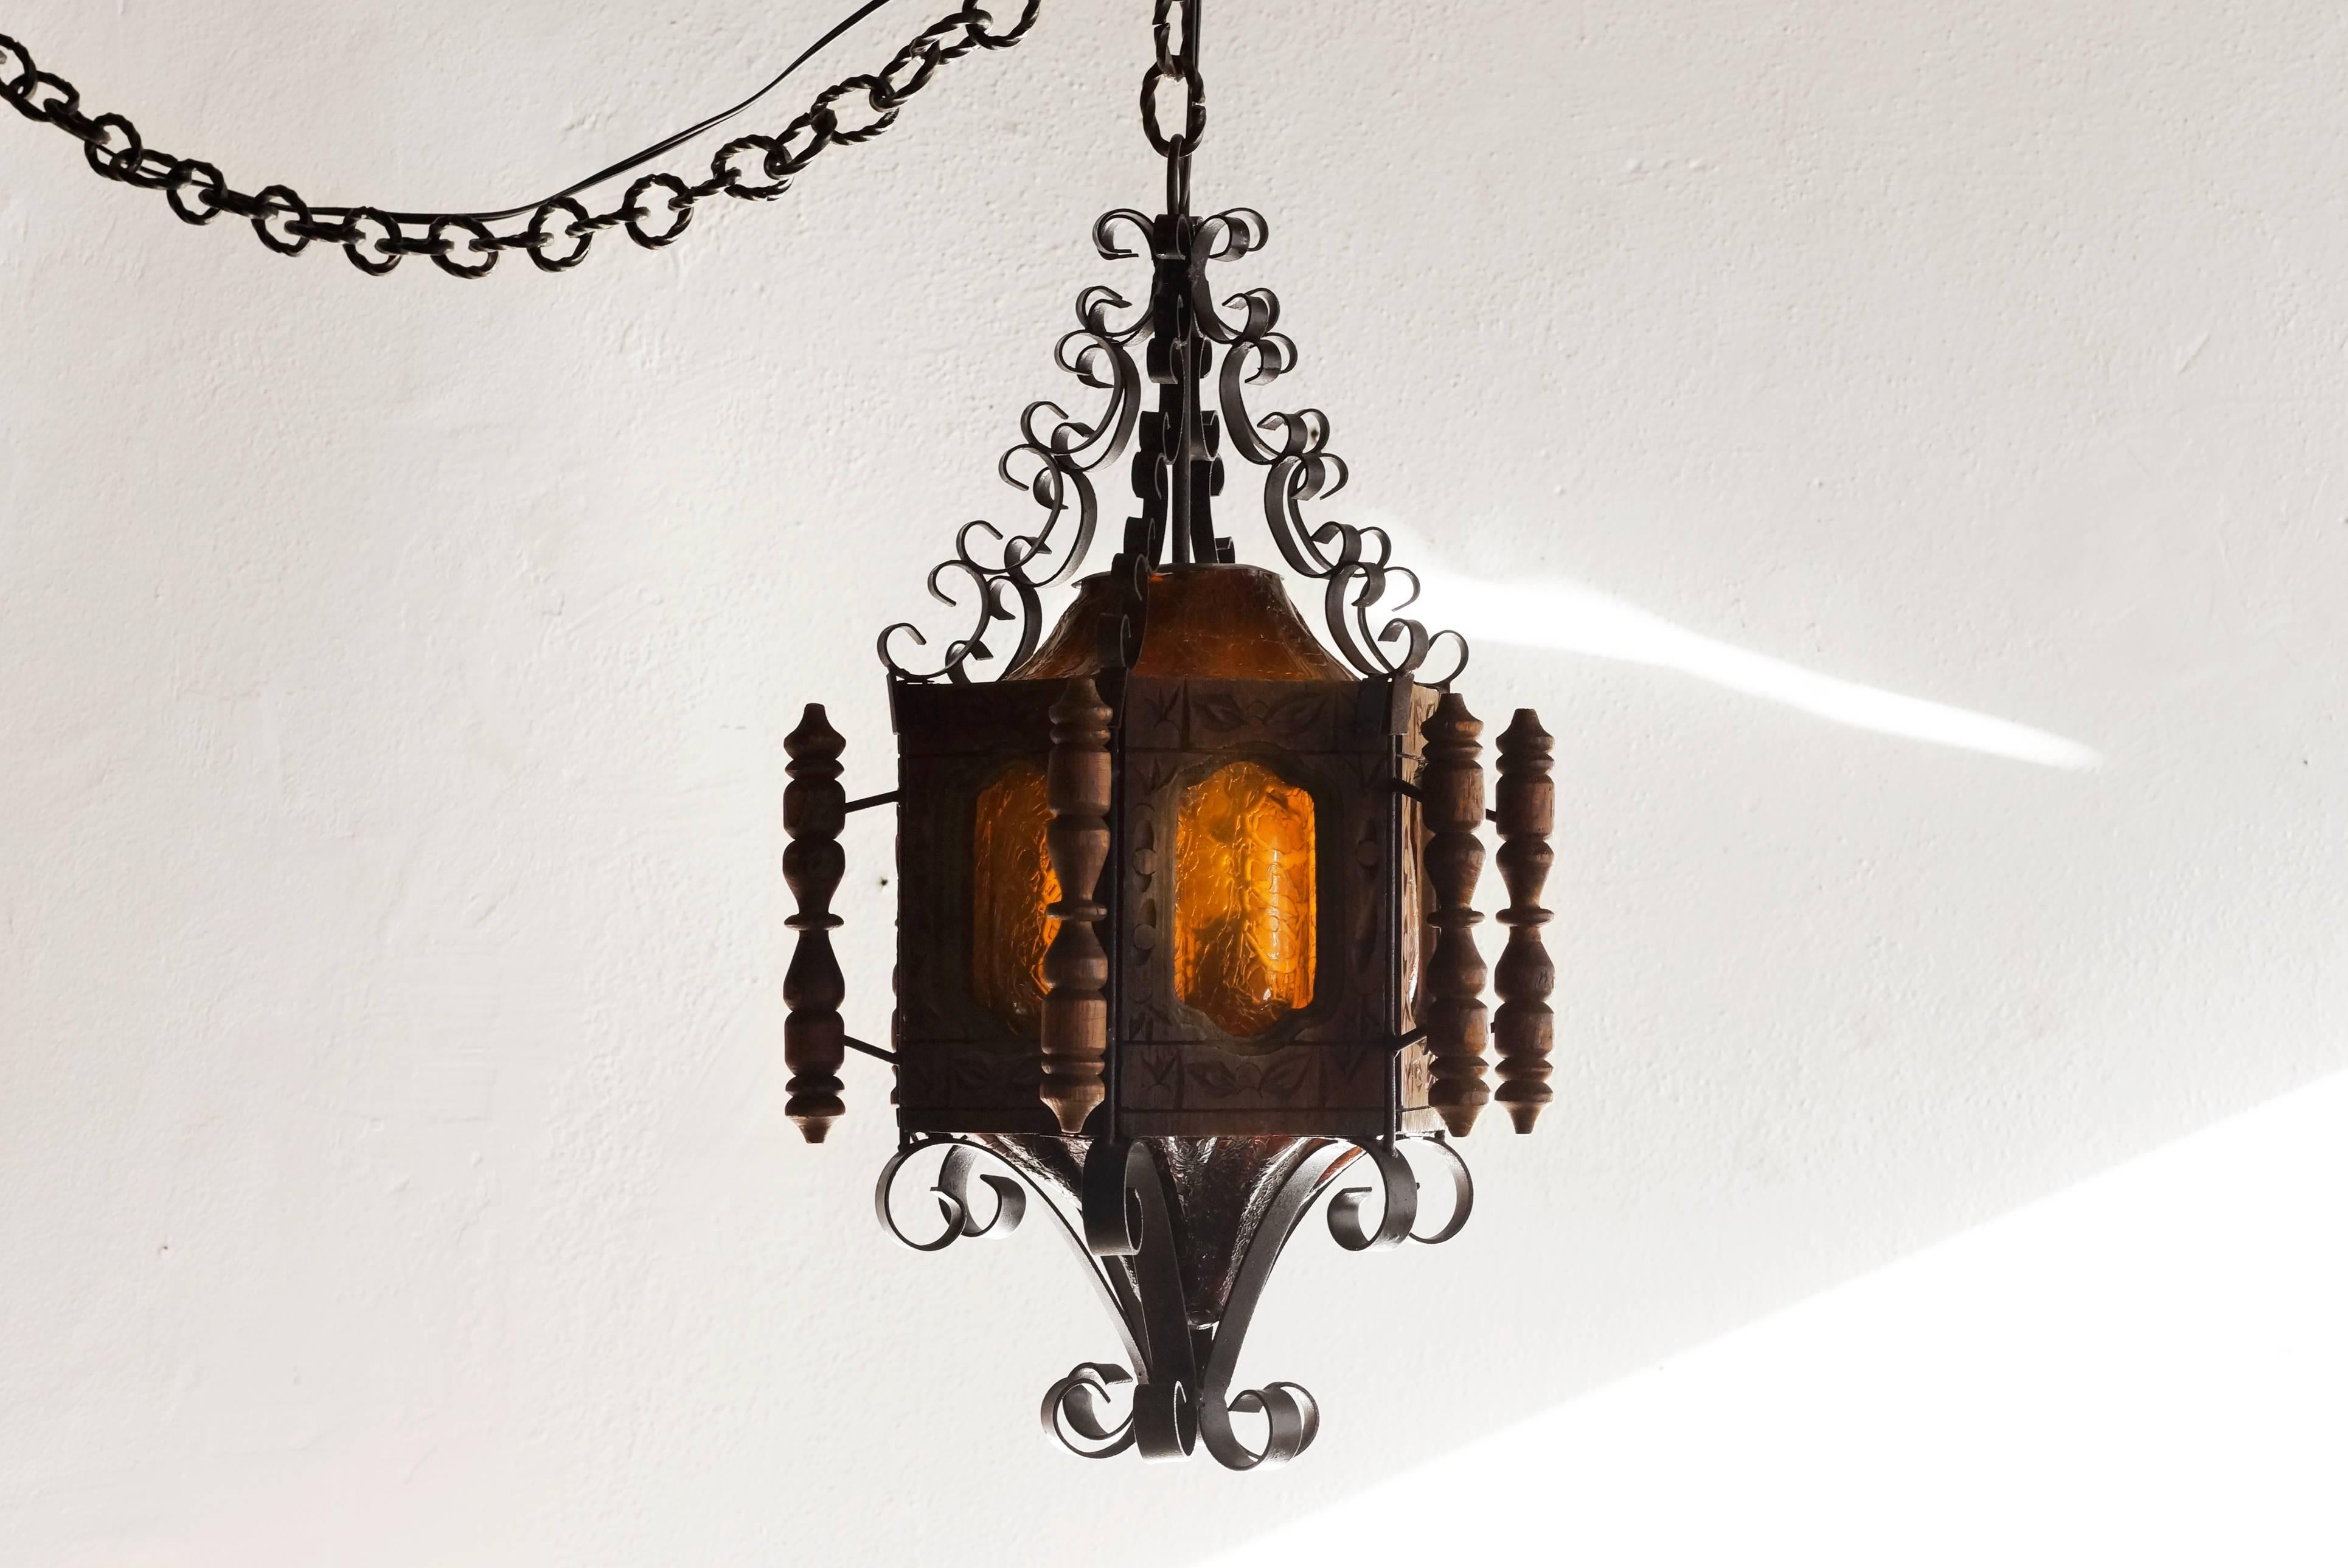 1960s Spanish revival pendant light of carved wood, wrought iron and tinted glass. This retro California fixture is fully-functional and ready to hang.

Dimensions: 28